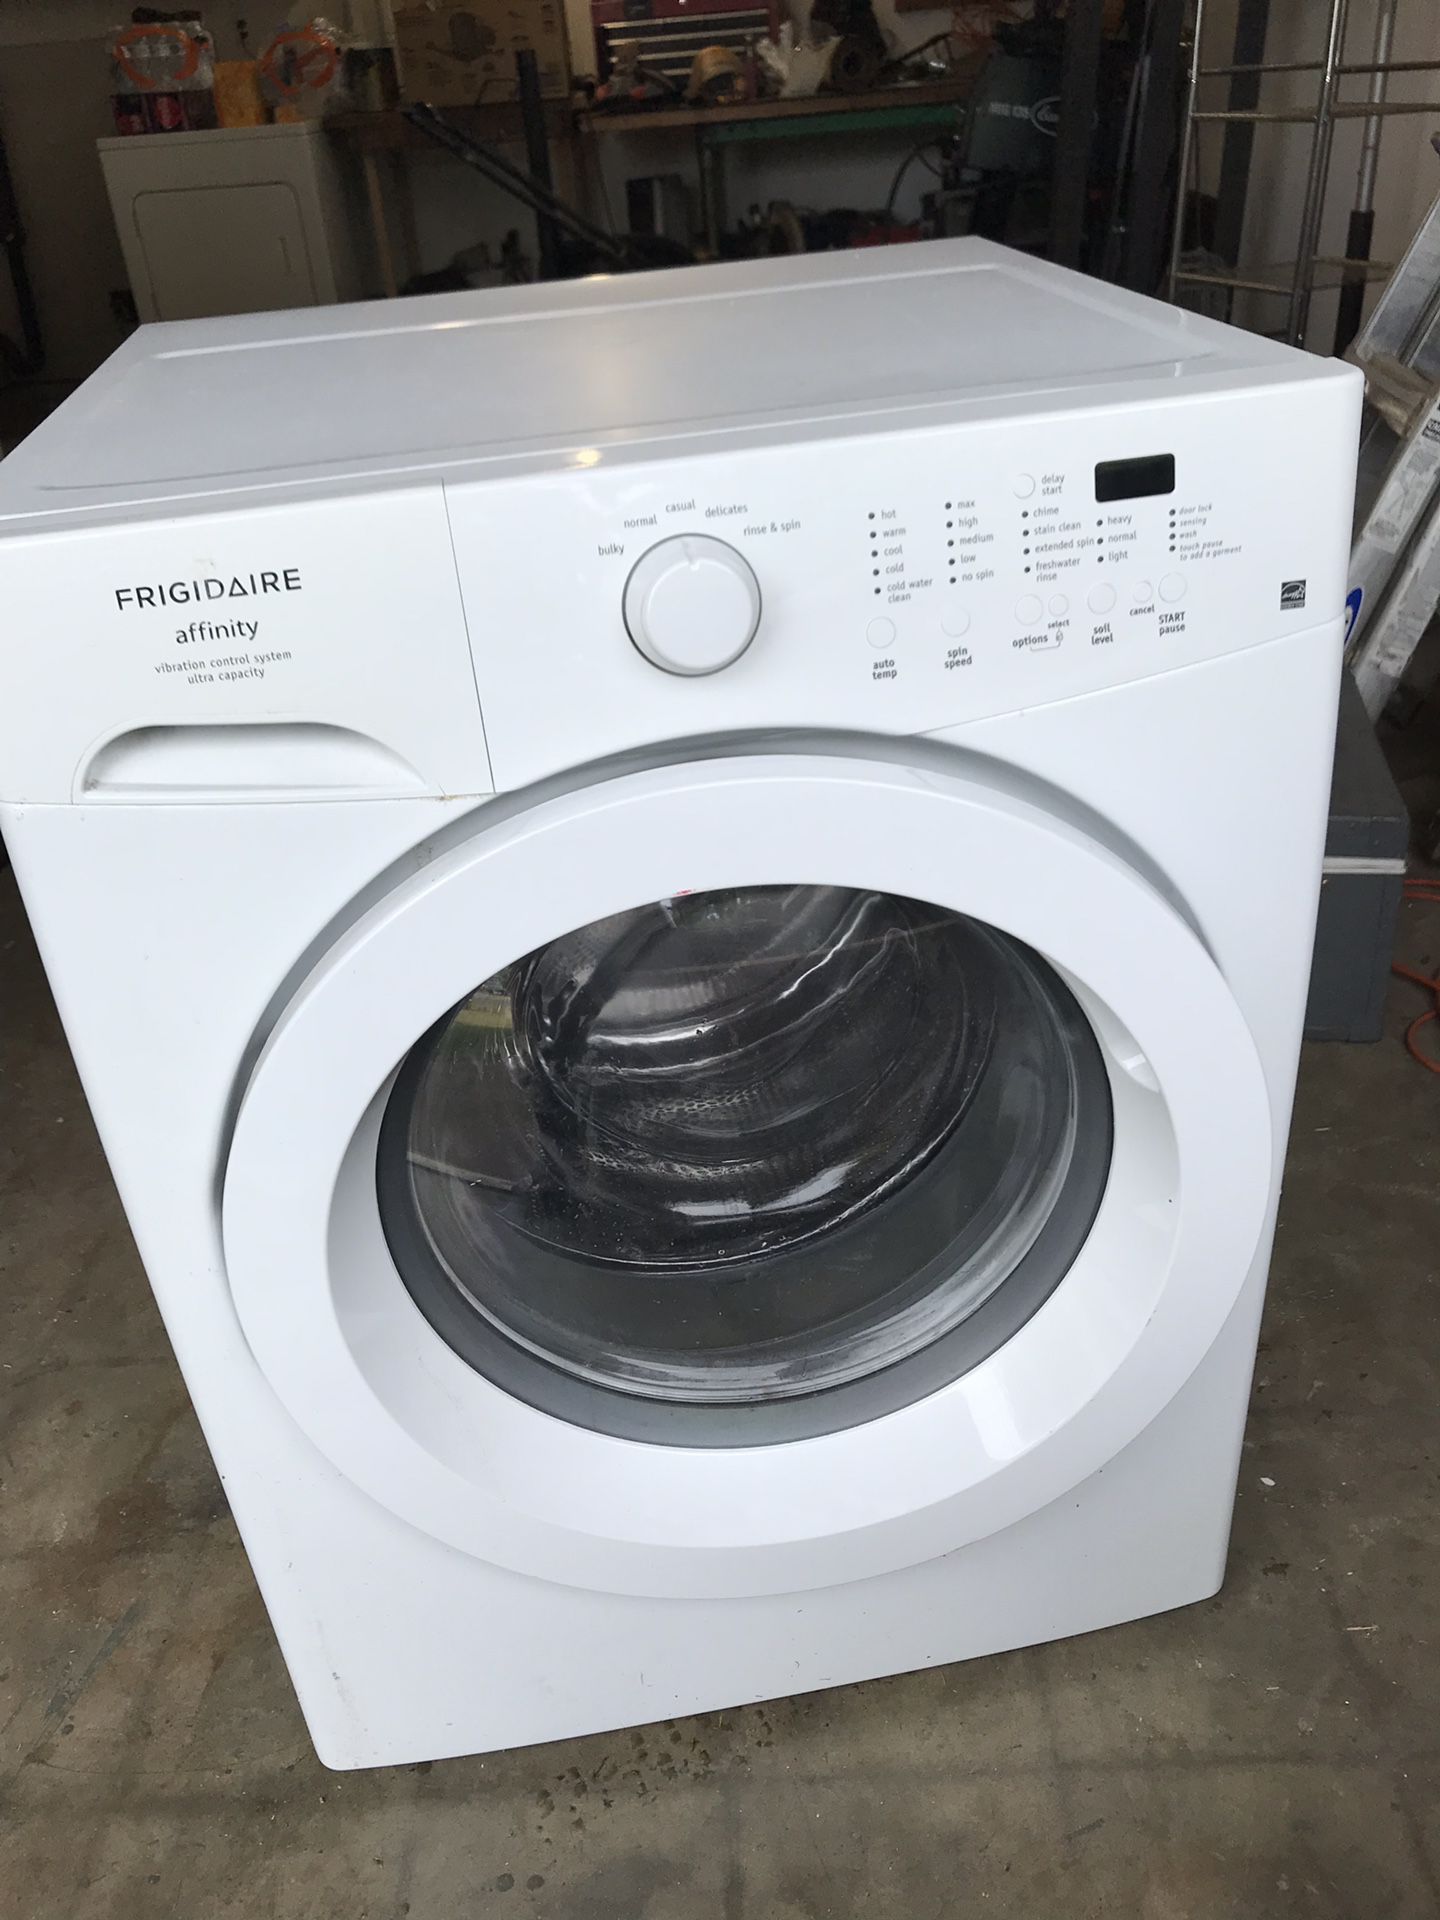 Frigidaire Affinity 3.2 cu ft front load washer